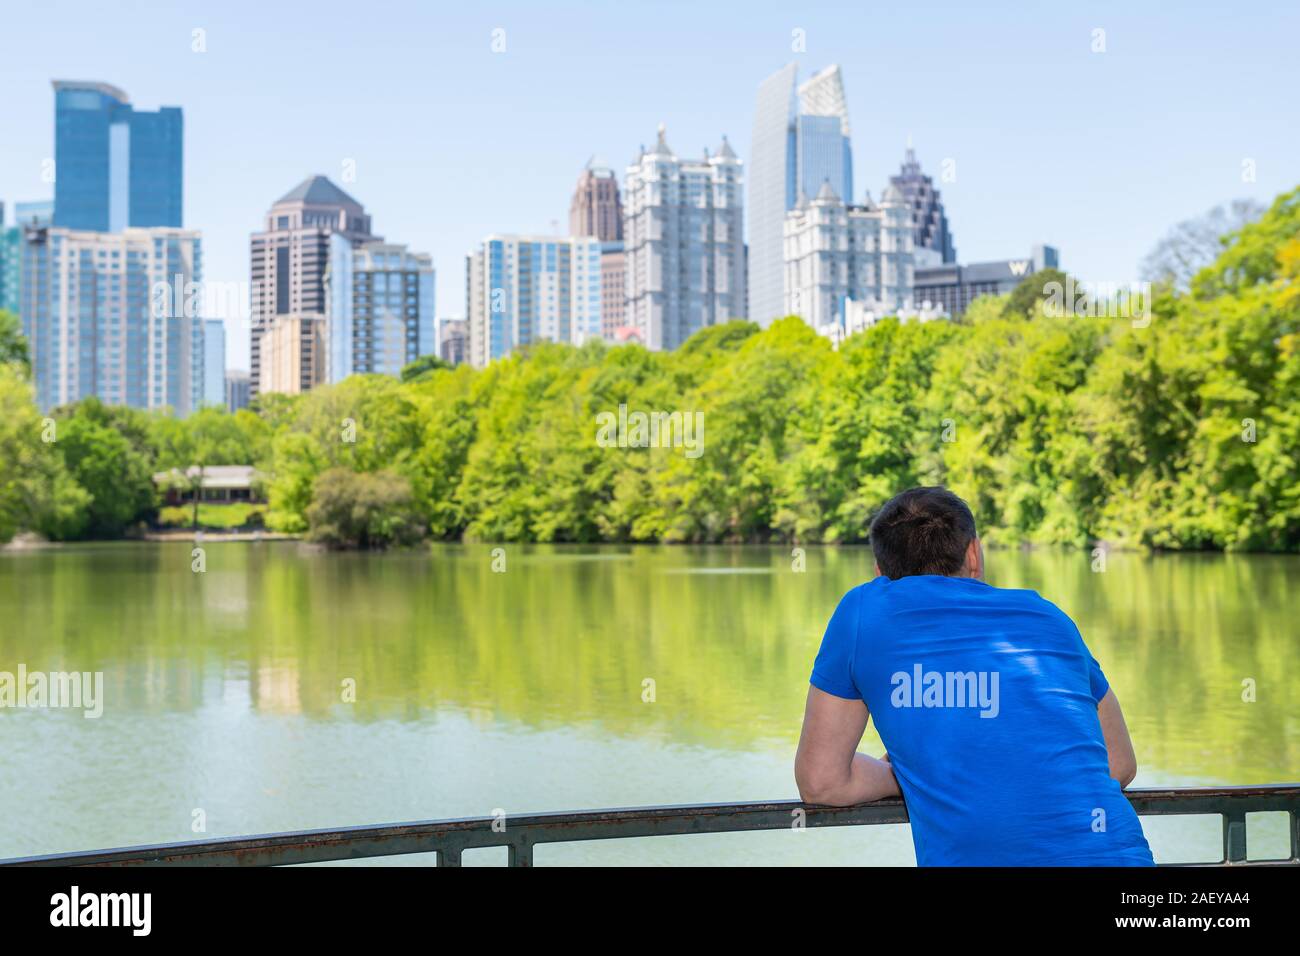 Man leaning on railing in Piedmont Park in Atlanta, Georgia looking at scenic landscape view of cityscape, skyline of urban city skyscrapers downtown Stock Photo